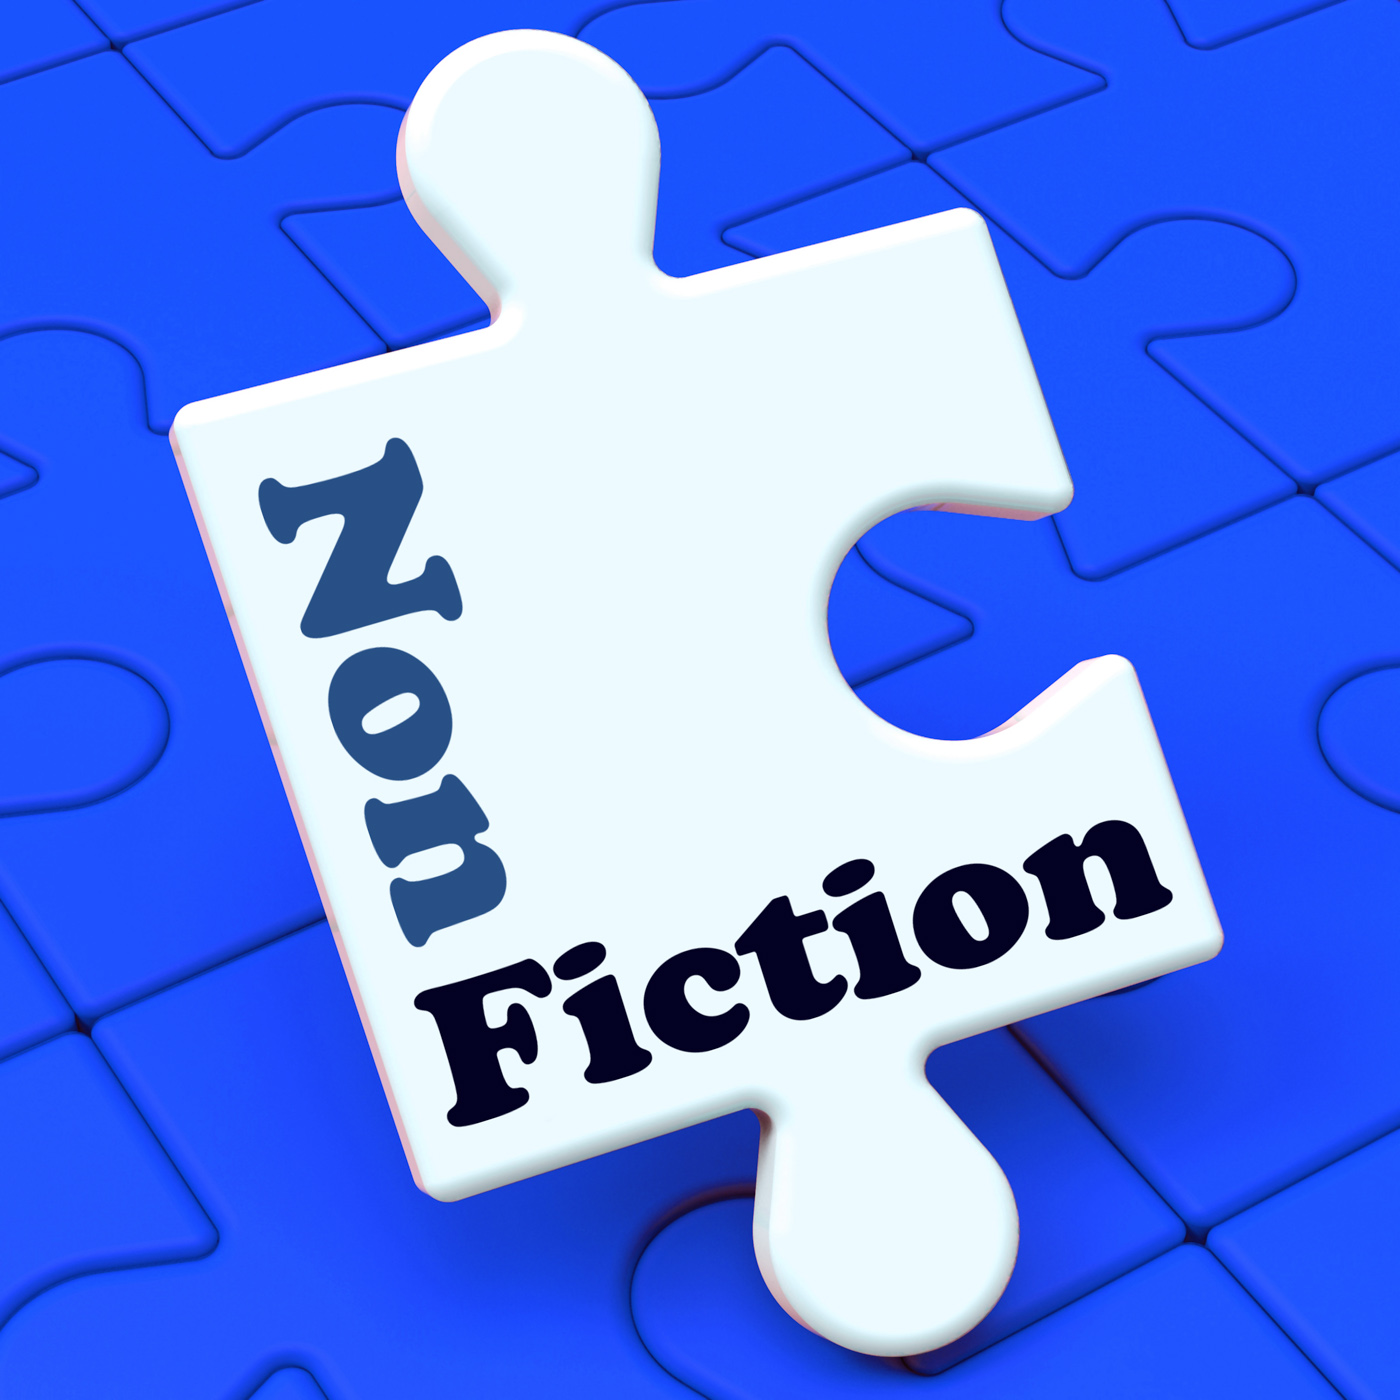 Non fiction puzzle shows educational material or text books photo